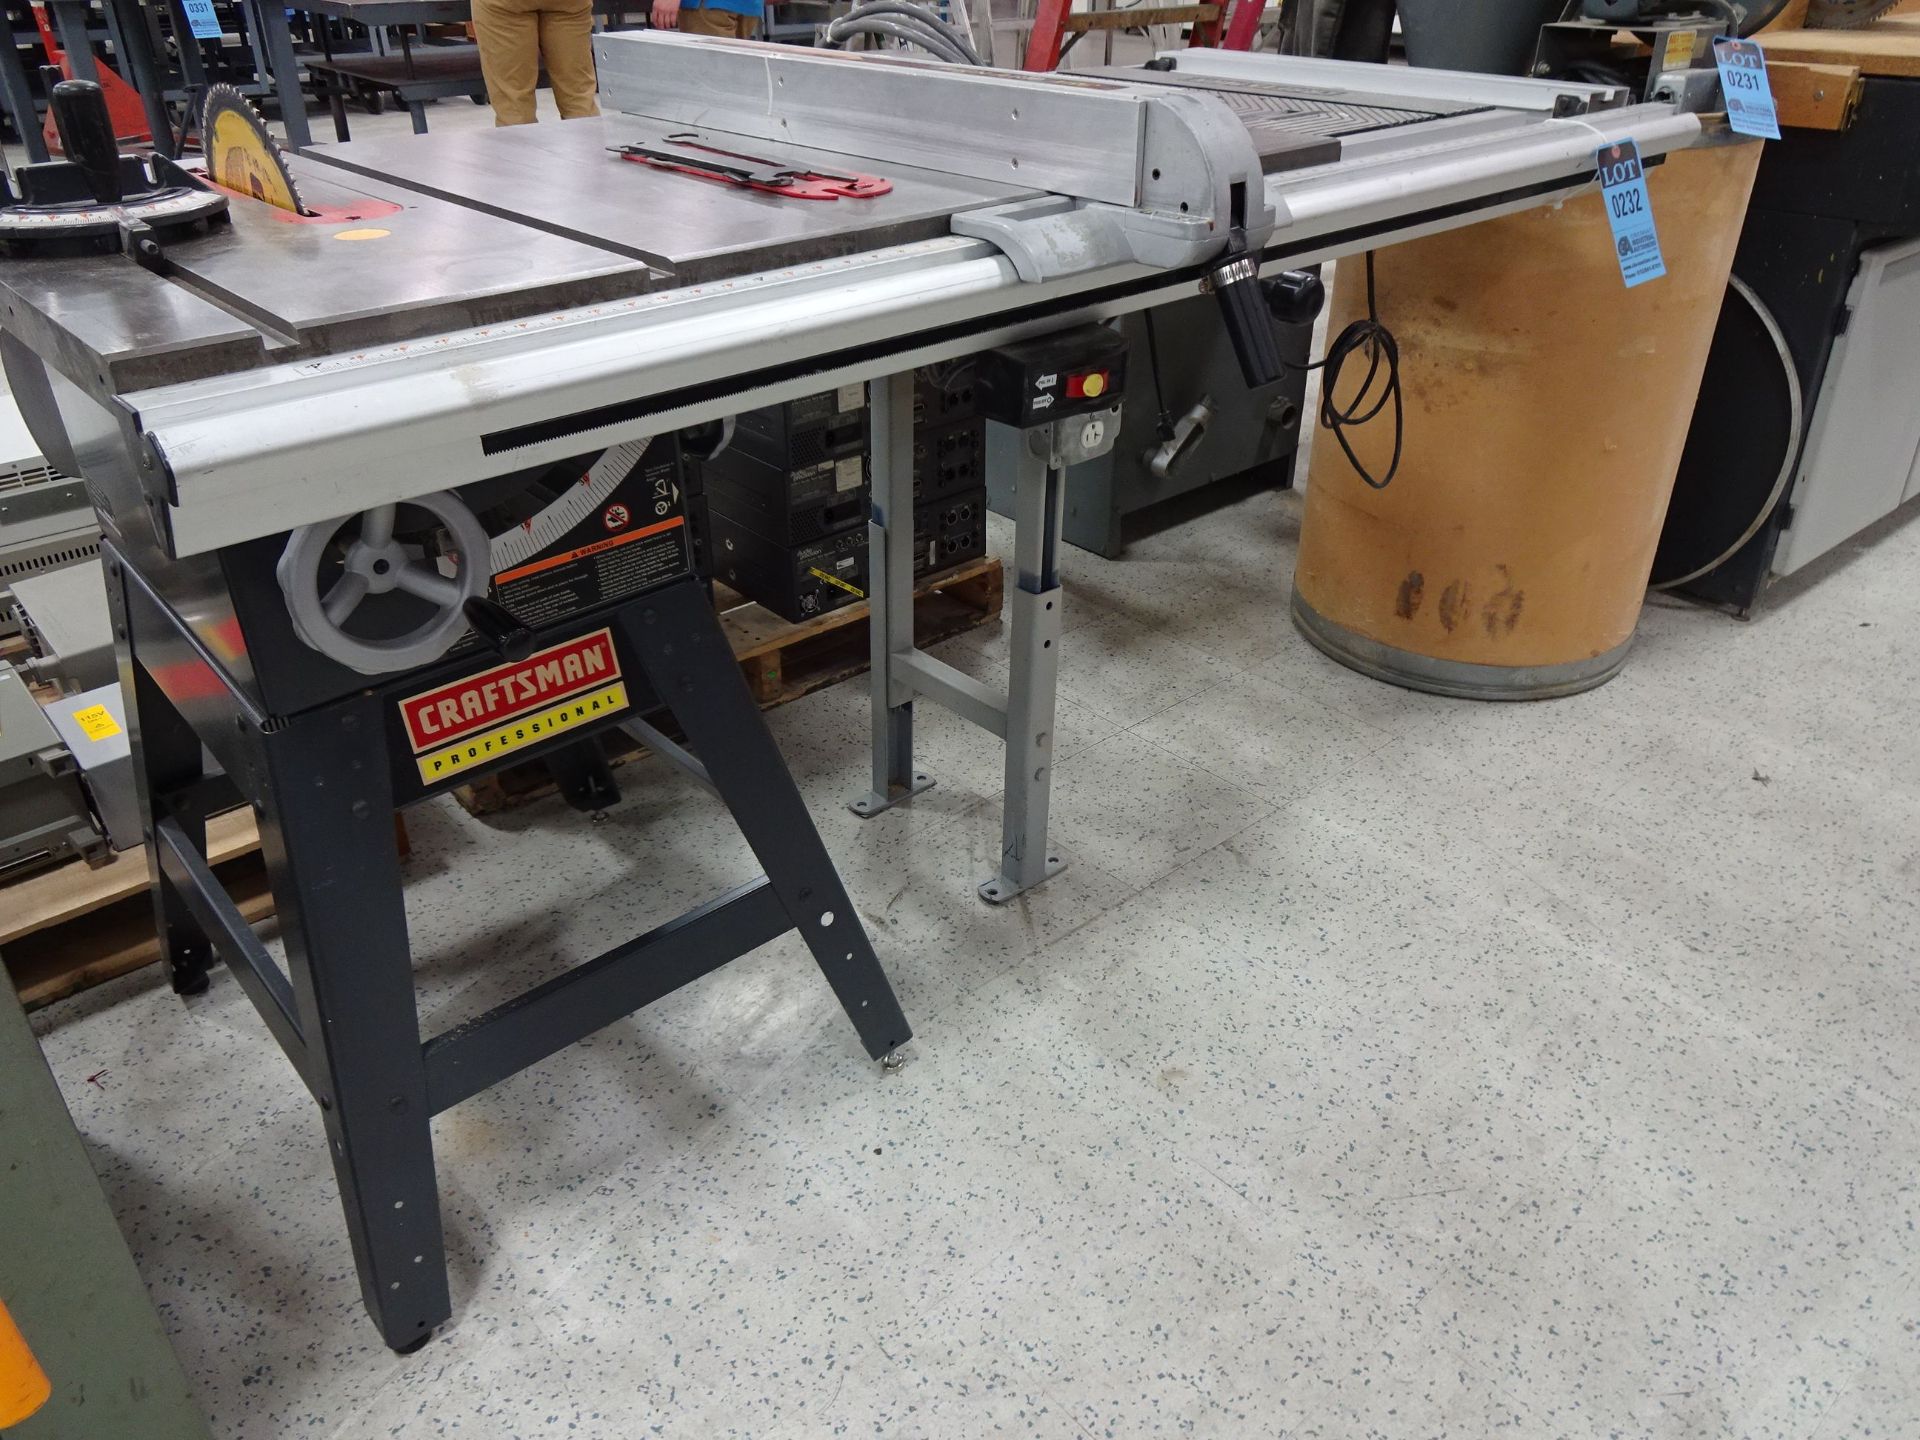 10" CRAFTSMAN MODEL 315.228510 STATIONARY TABLE SAW; S/N P9179.10415 - Image 2 of 6